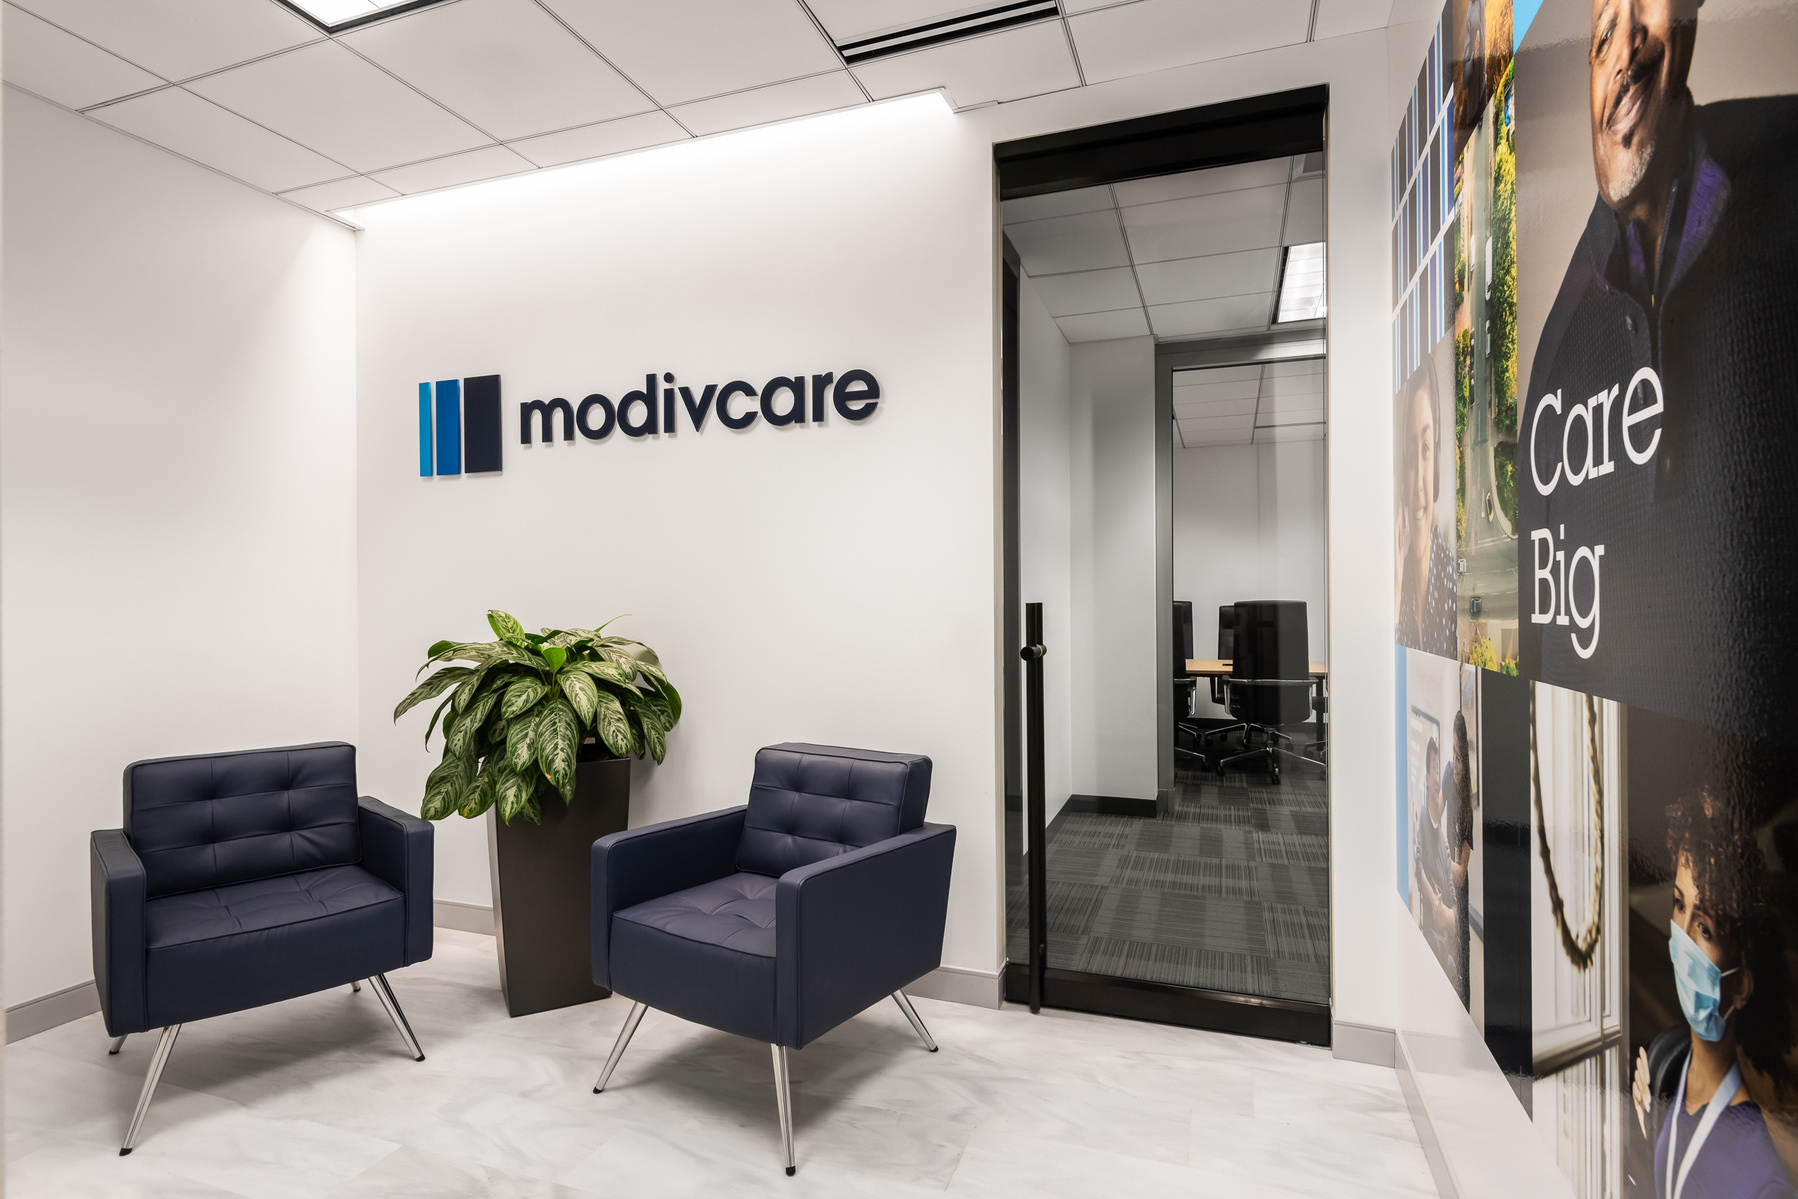 Architectural photography showing Modivcare lobby entrance with signage. Architect for project is Focus Studio.  Photography by St. Louis Architectural Photographer Karen Palmer.